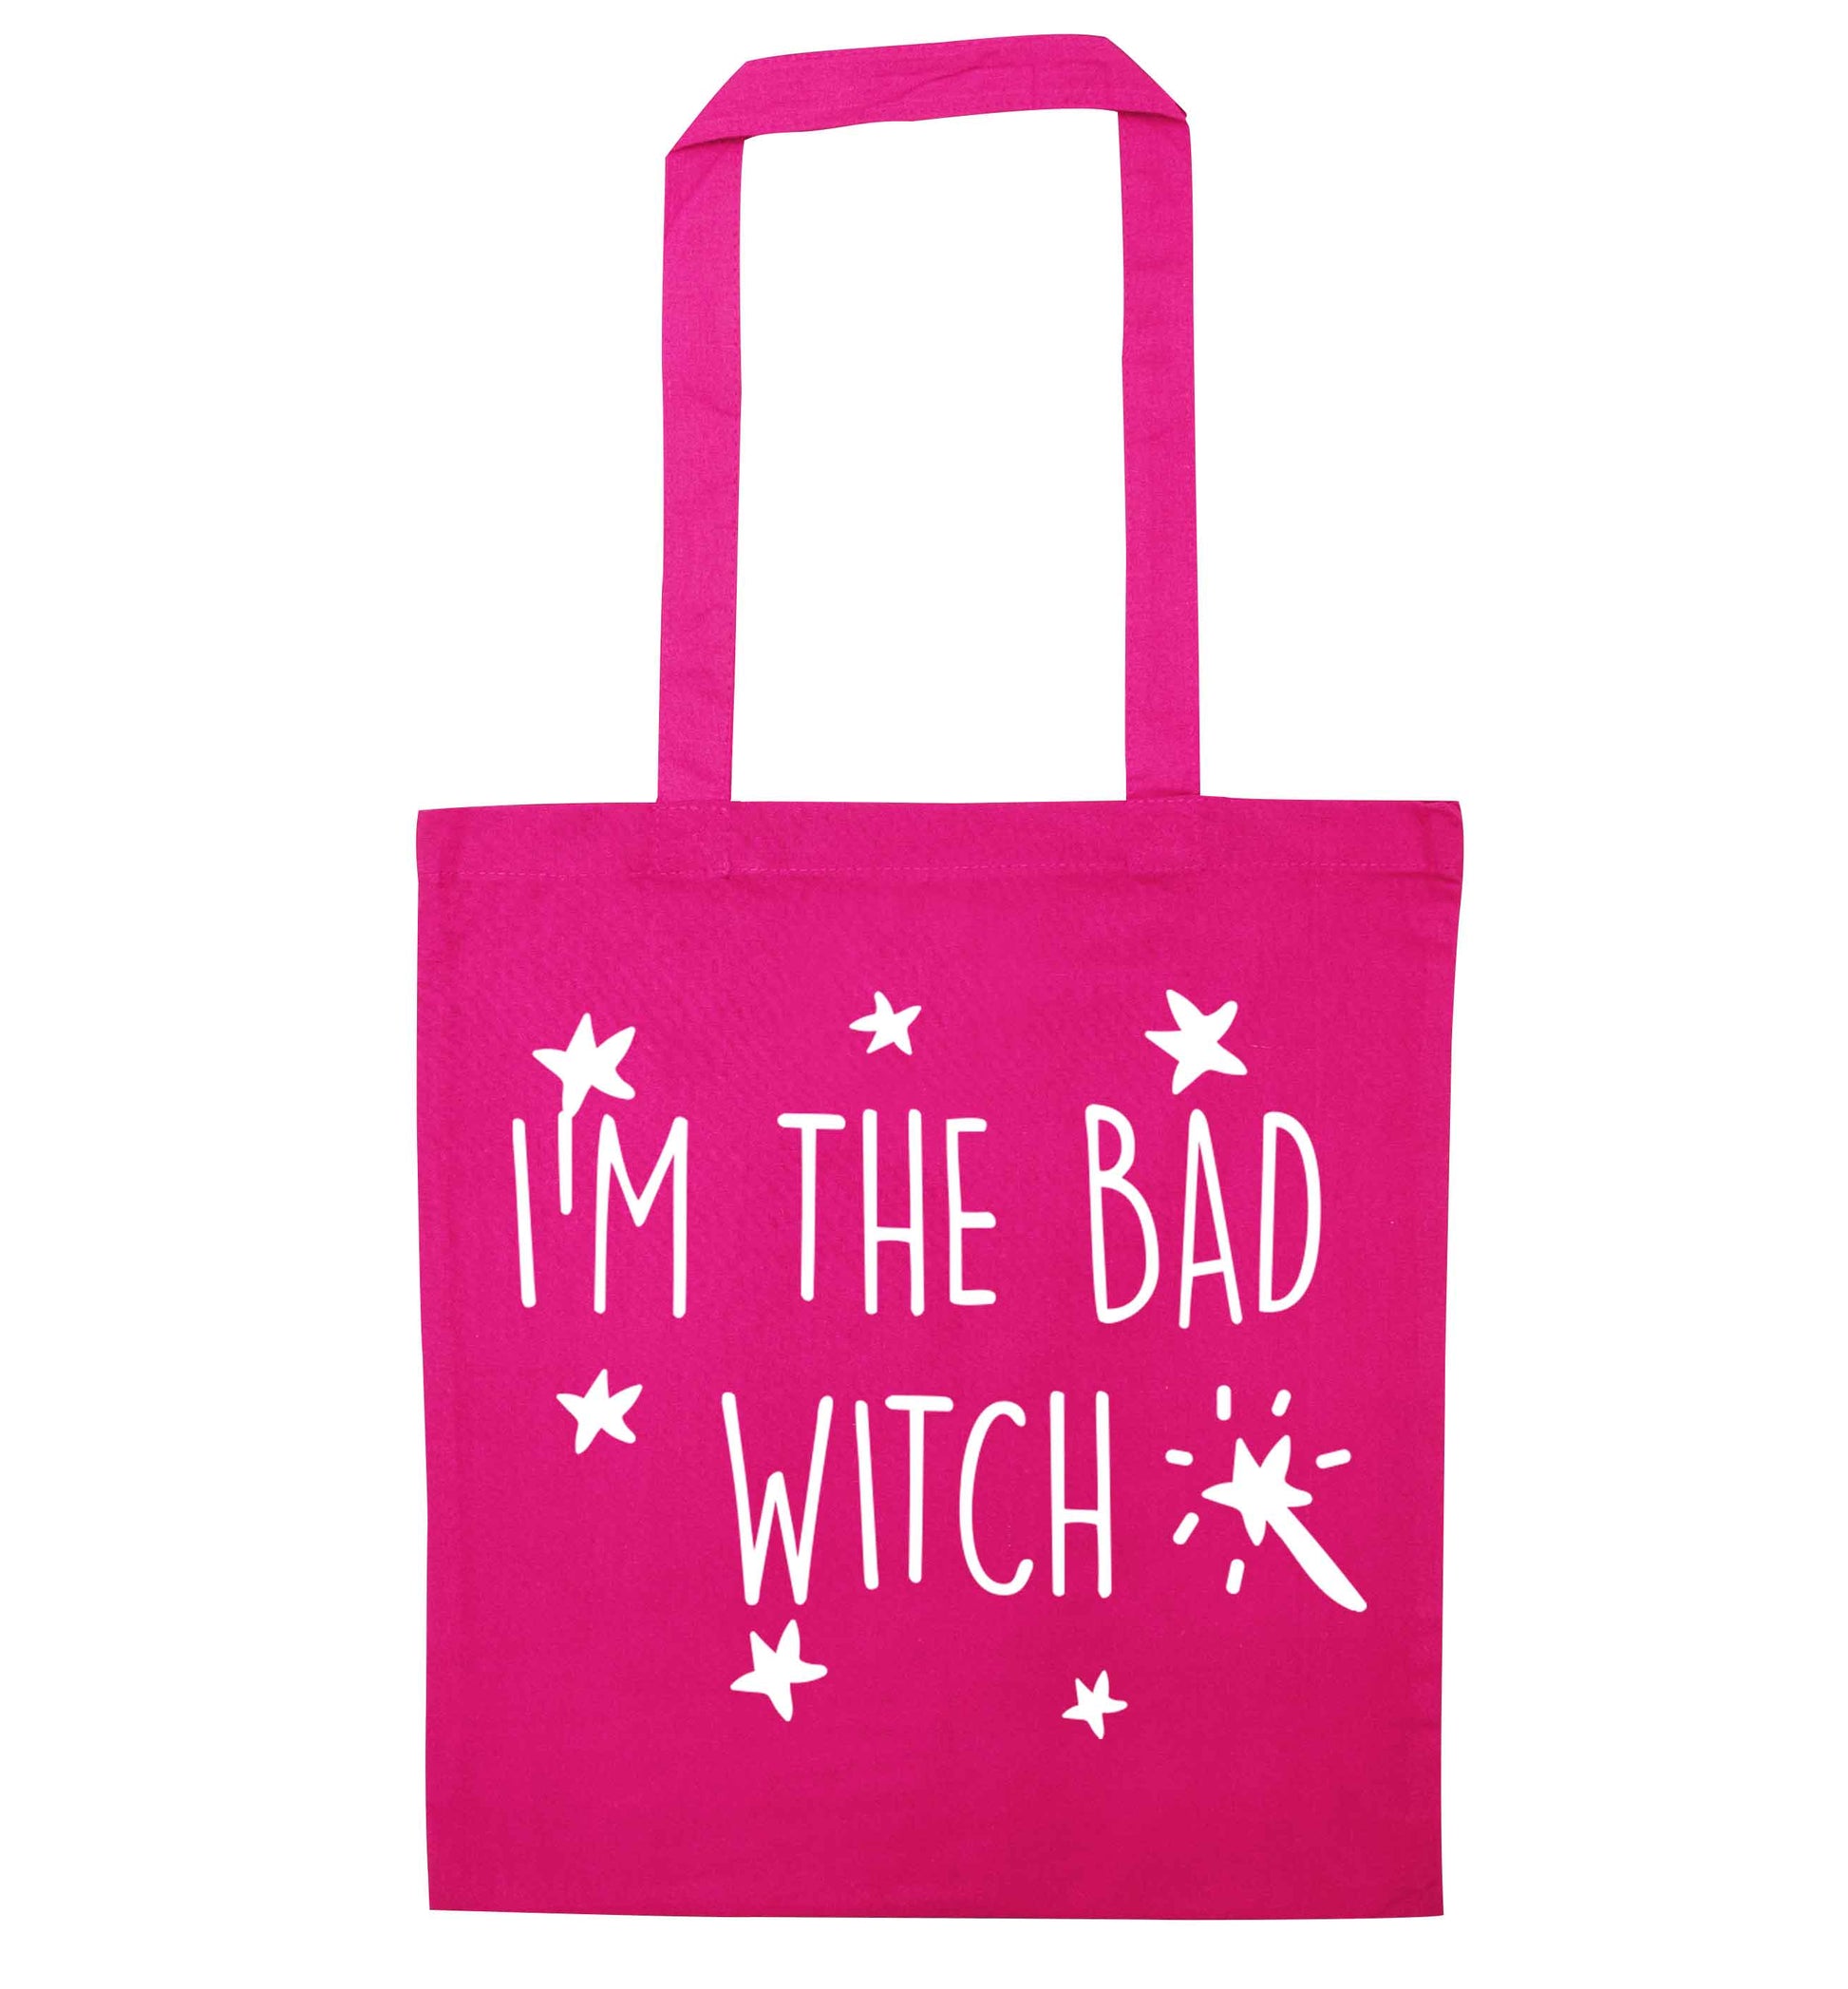 Bad witch pink tote bag